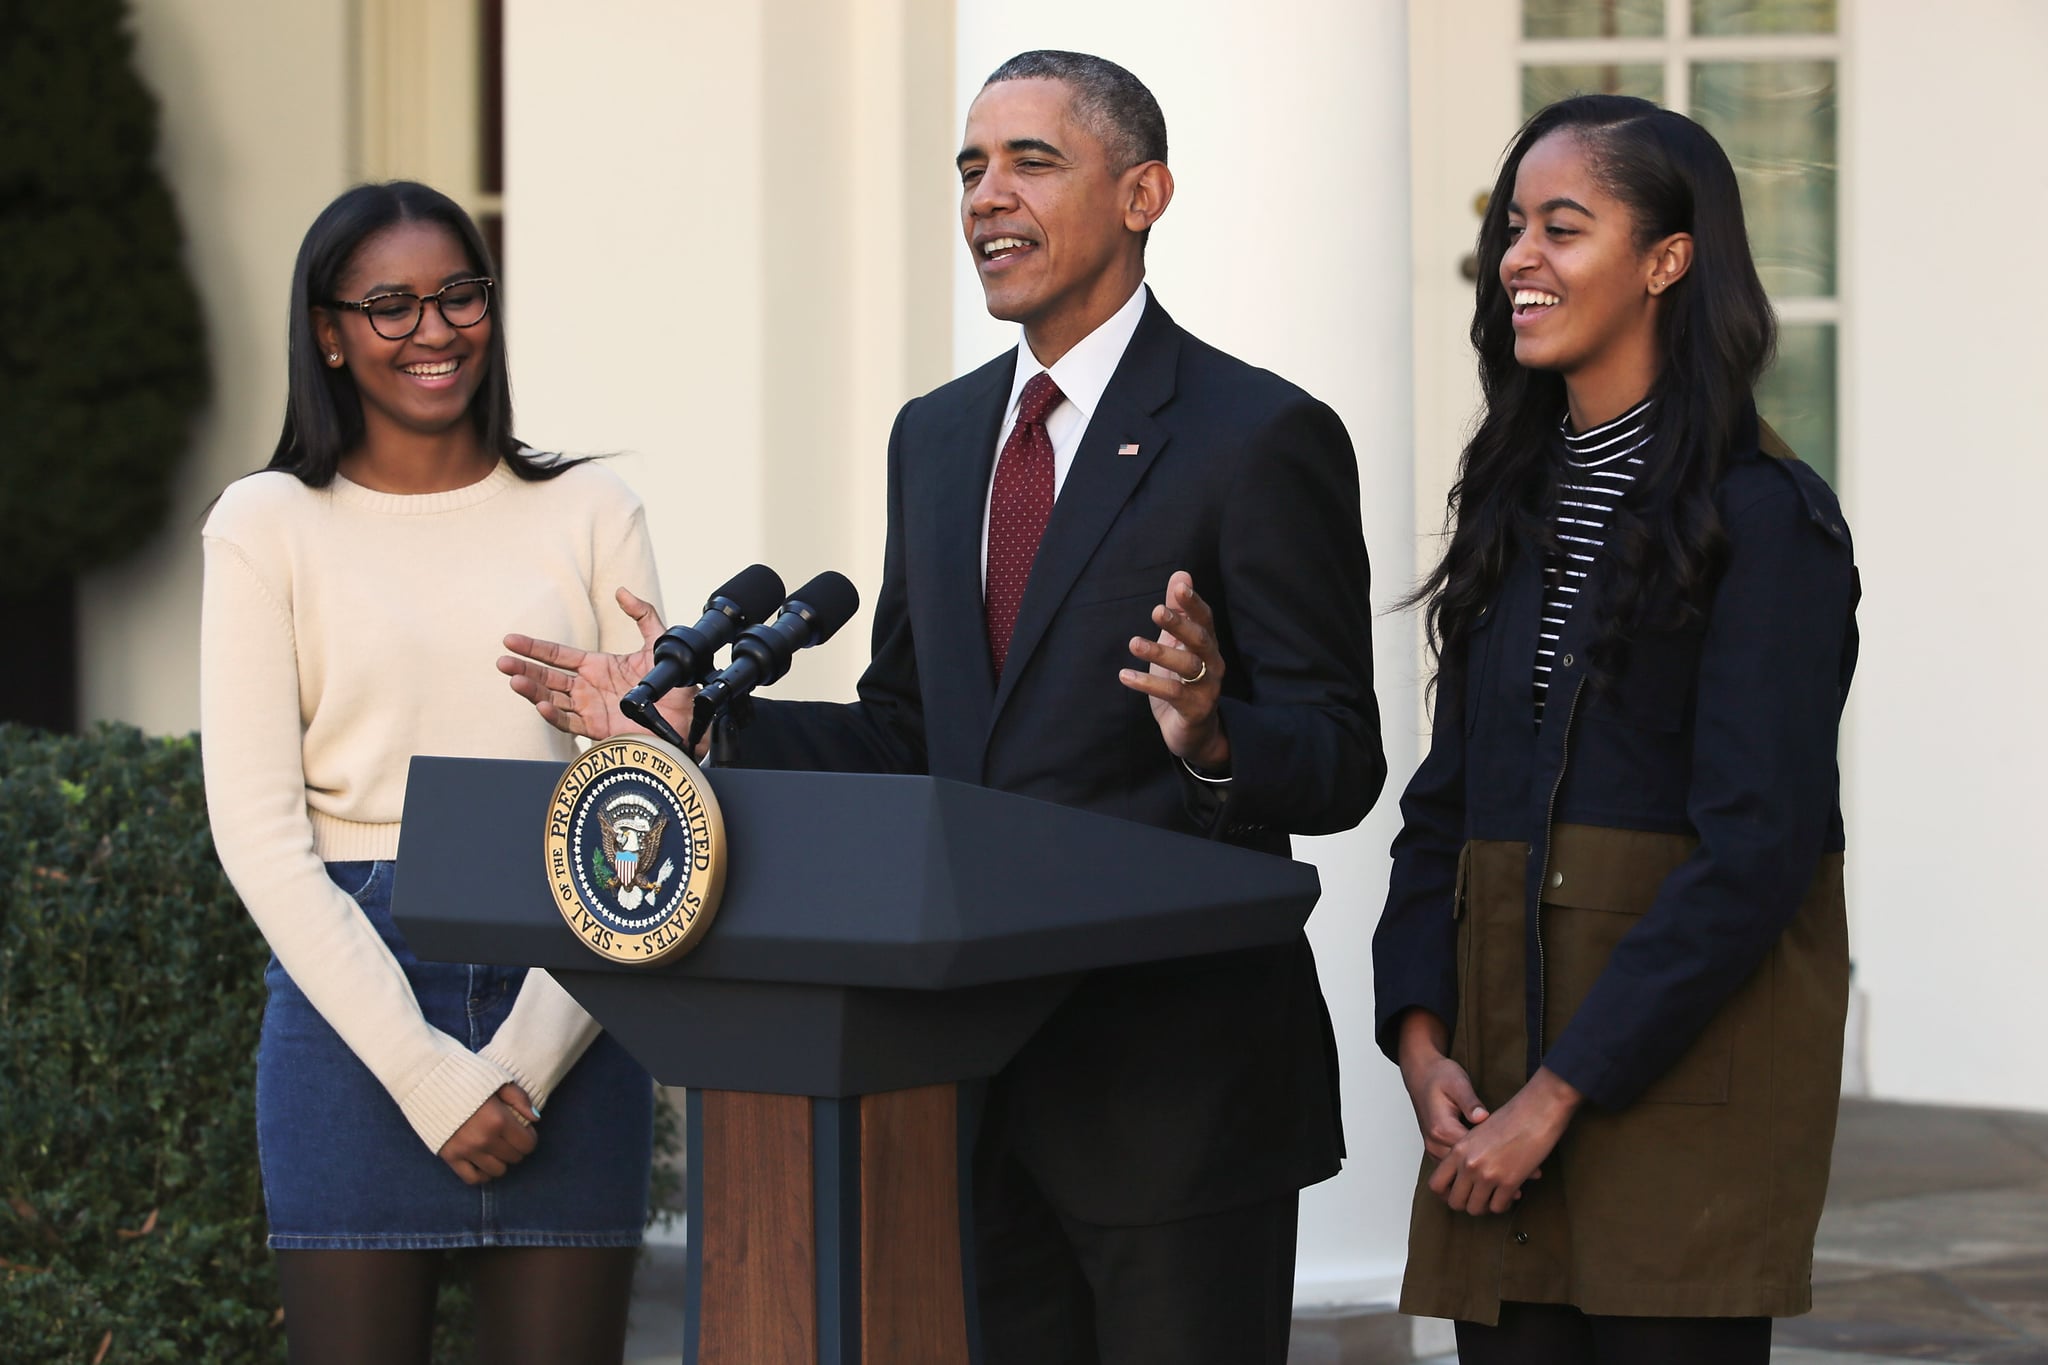 WASHINGTON, DC - NOVEMBER 25:  U.S. President Barack Obama delivers remarks with his daughters Sasha (L) and Malia during the annual turkey pardoning ceremony in the Rose Garden at the White House  November 25, 2015 in Washington, DC. In a tradition dating back to 1947, the president pardons a turkey, sparing the tom -- and his alternate -- from becoming a Thanksgiving Day feast. This year, Americans were asked to choose which of two turkeys would be pardoned and to cast their votes on Twitter.  (Photo by Chip Somodevilla/Getty Images)